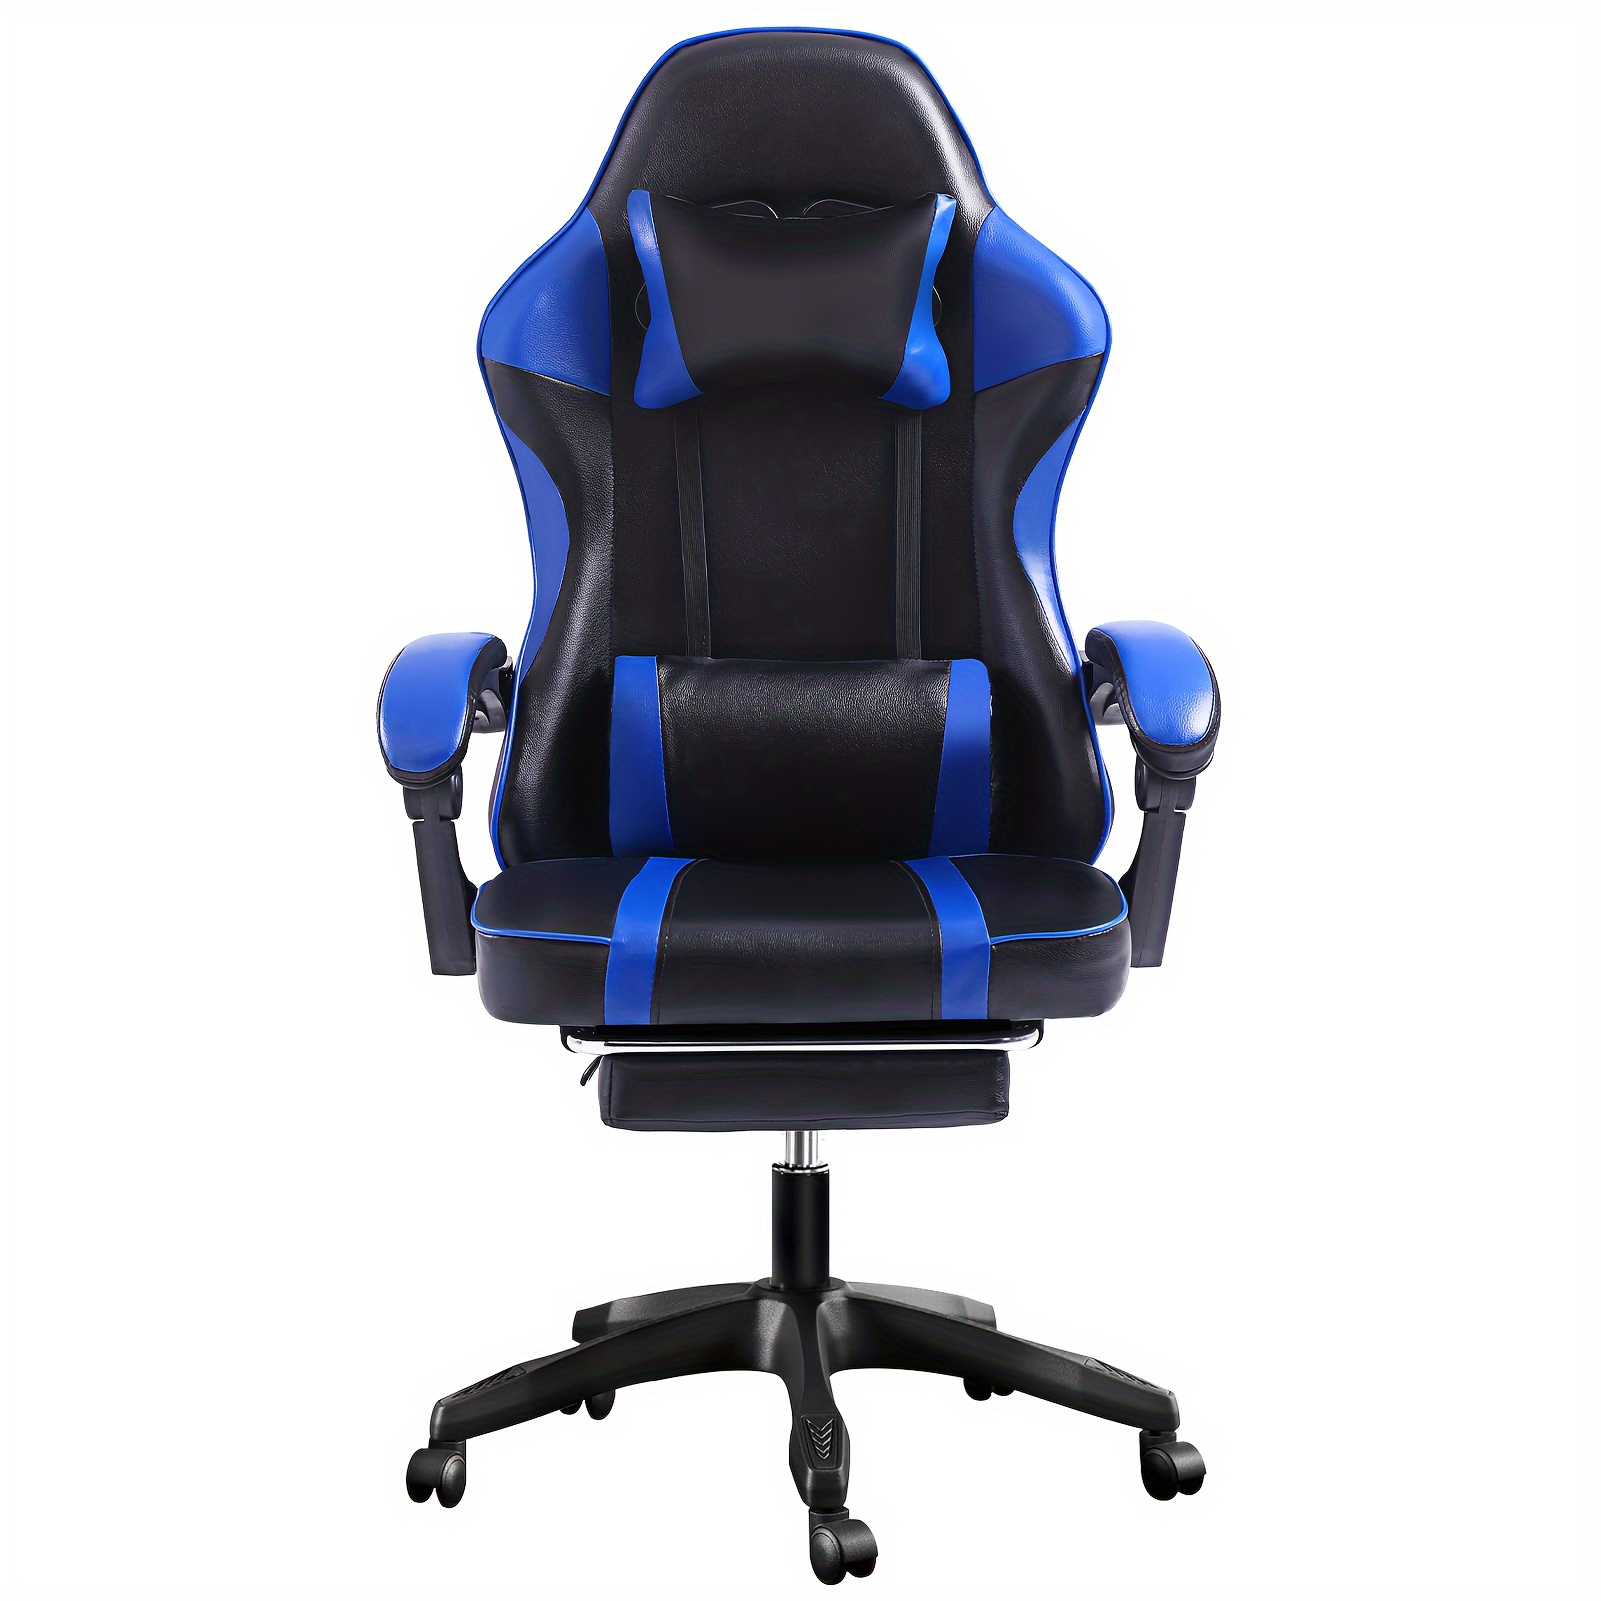 

Ergonomic Gaming Chair With Footrest, Comfort High Back Computer Chair With Adjustable Swivel For Adults, Pu Leather Reclining Gamer Chair Office Desk Chair With Lumbar Support